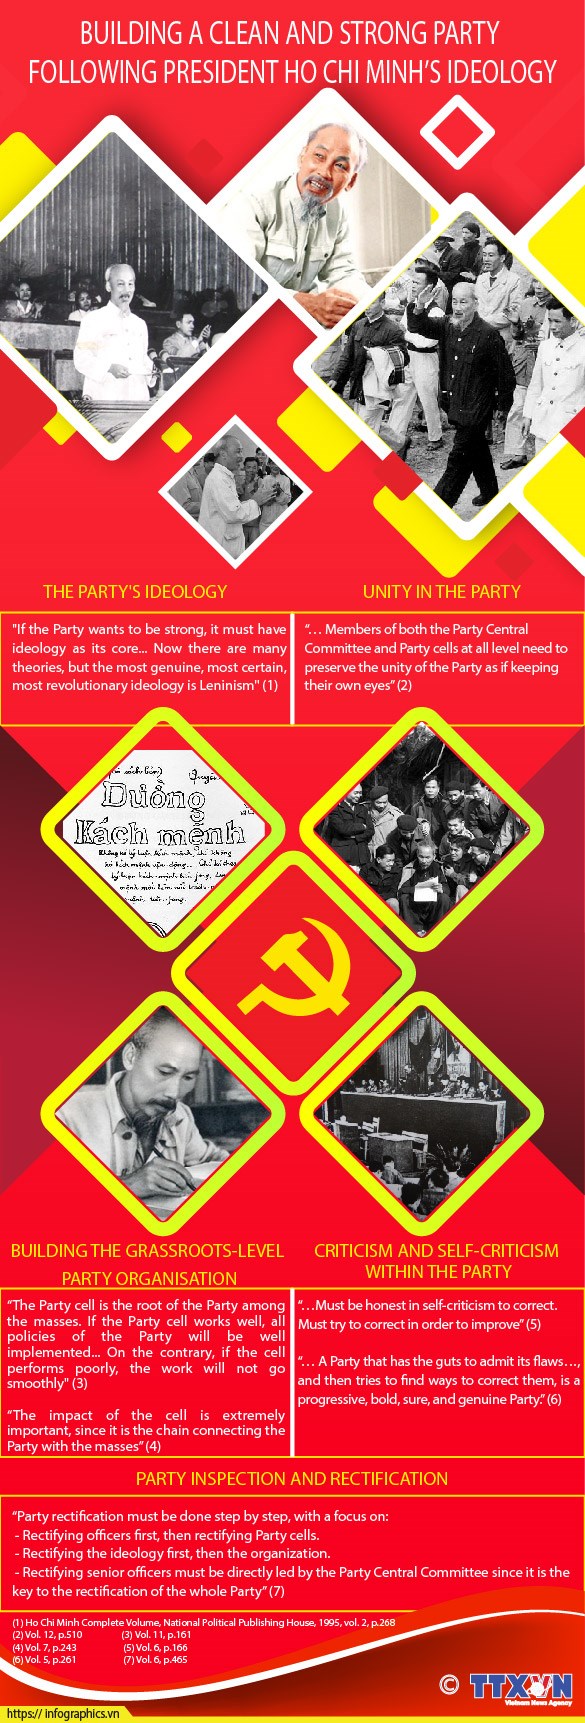 Building a clean and strong Party following President Ho Chi Minh’s ideology hinh anh 1